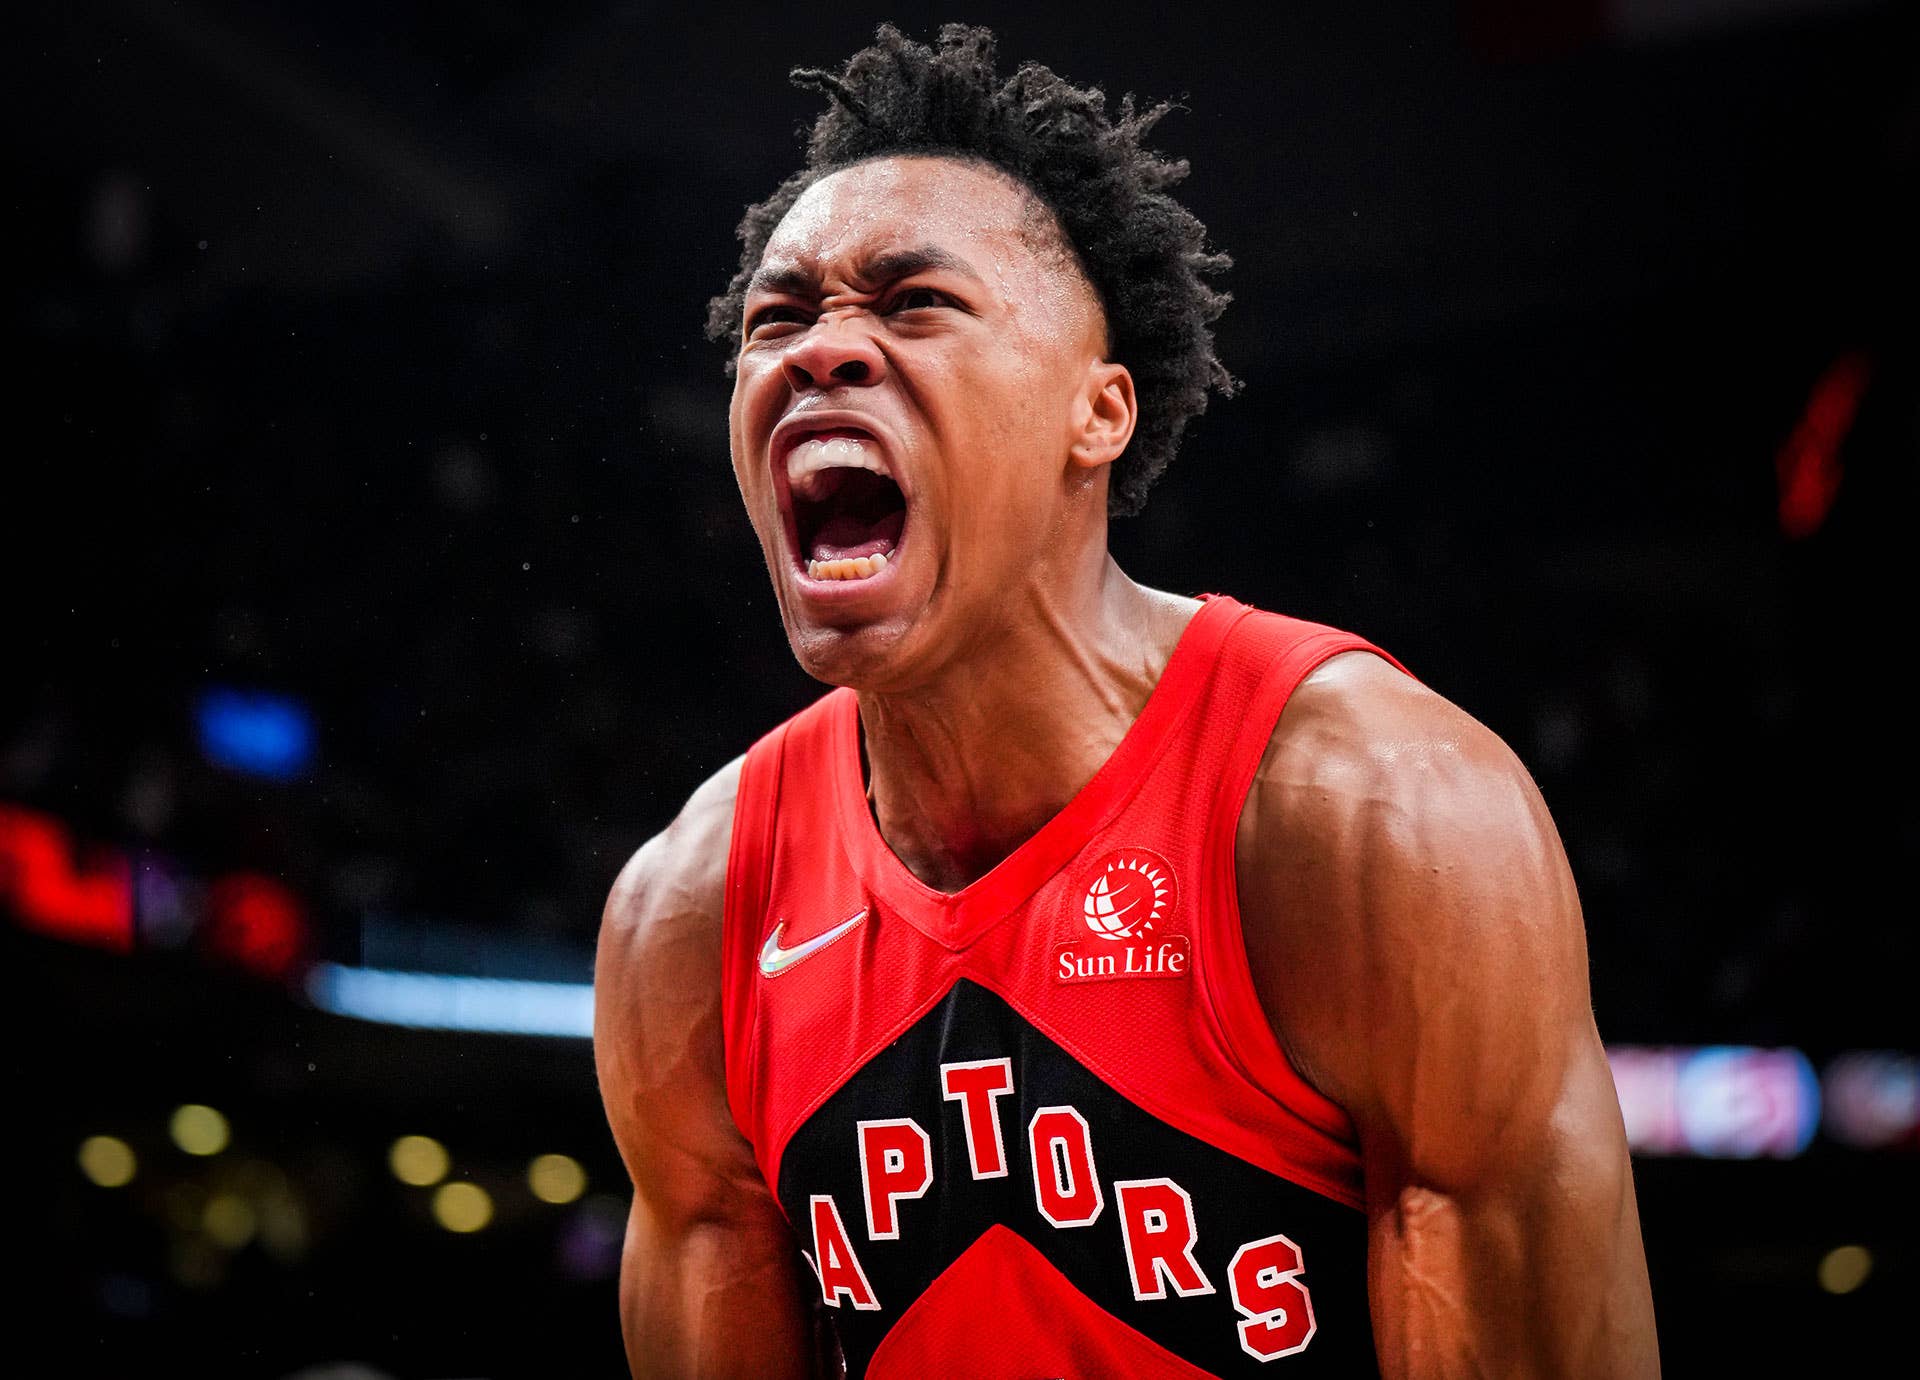 Scottie Barnes #4 of the Toronto Raptors celebrates against the Philadelphia 76ers during the second half of their basketball game at the Scotiabank Arena on April 7, 2022 in Toronto, Ontario, Canada